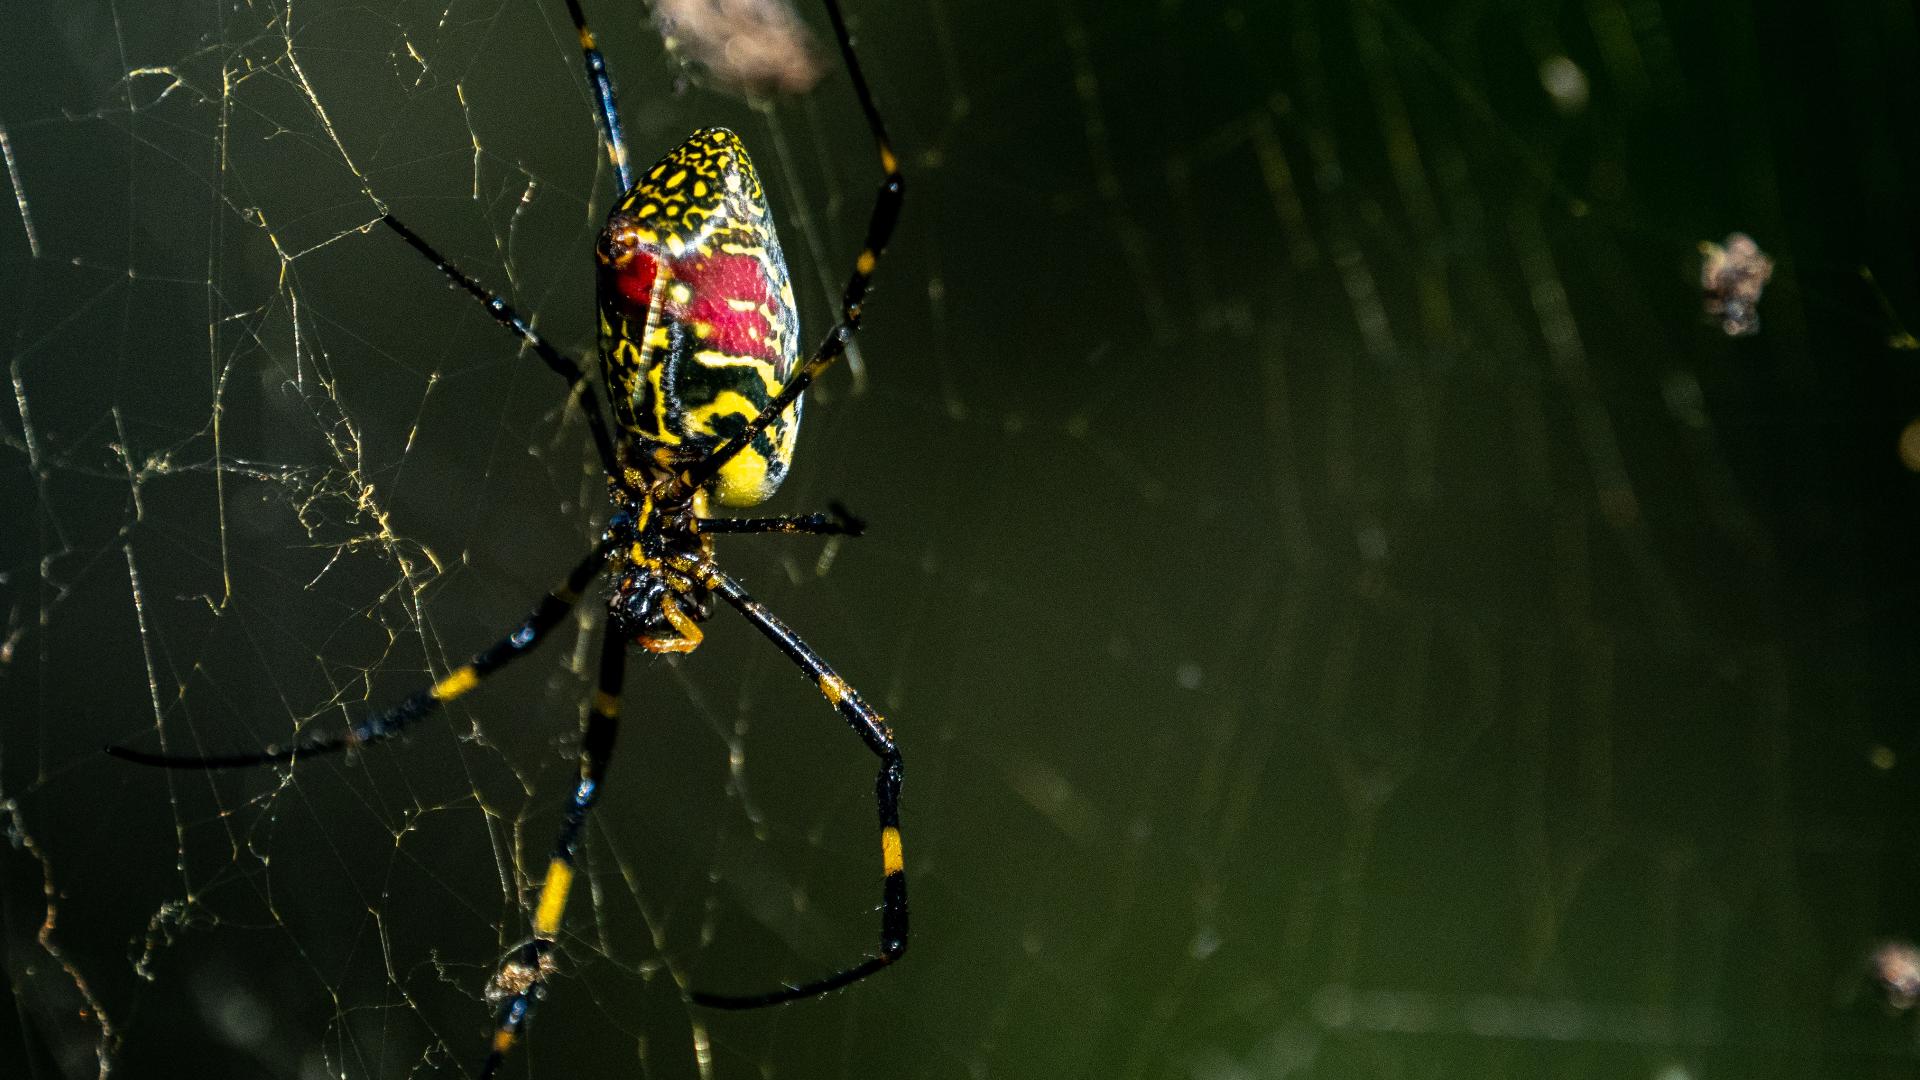 A spider from Asia has been spotted on the east coast and the striped species is moving north with help from humans.